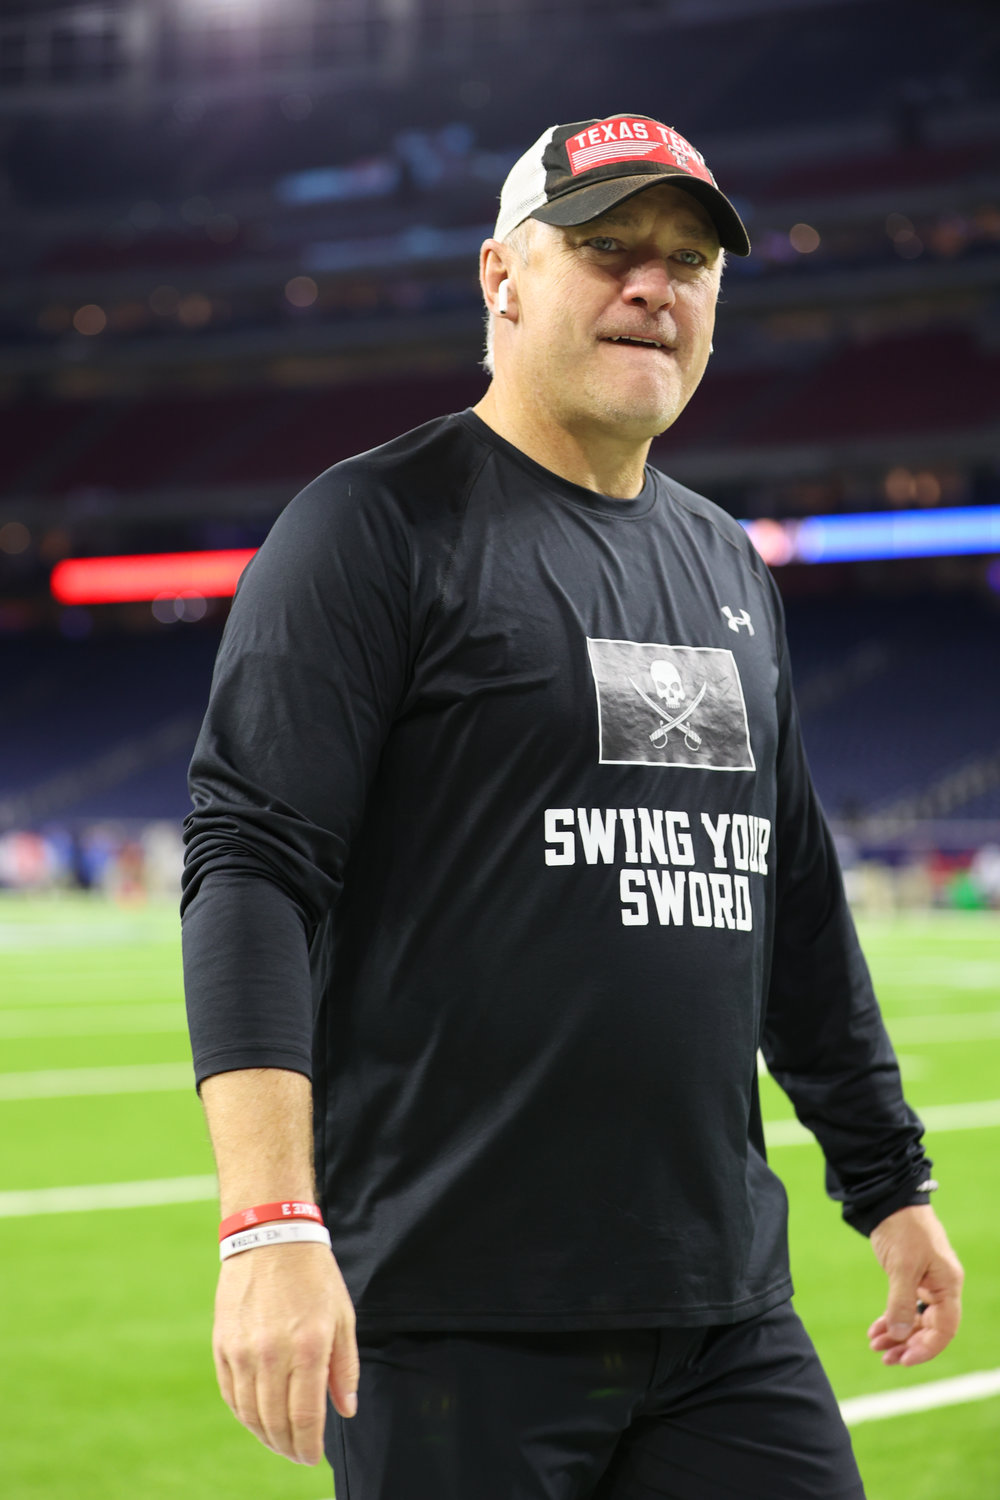 Texas Tech head coach Joey McGuire wears a “Swing Your Sword” shirt on the field prior to the start of the TaxAct Texas Bowl on Dec. 28, 2022 in Houston. The shirt is in honor of former Texas Tech head coach Mike Leach, who passed away on Dec. 12.